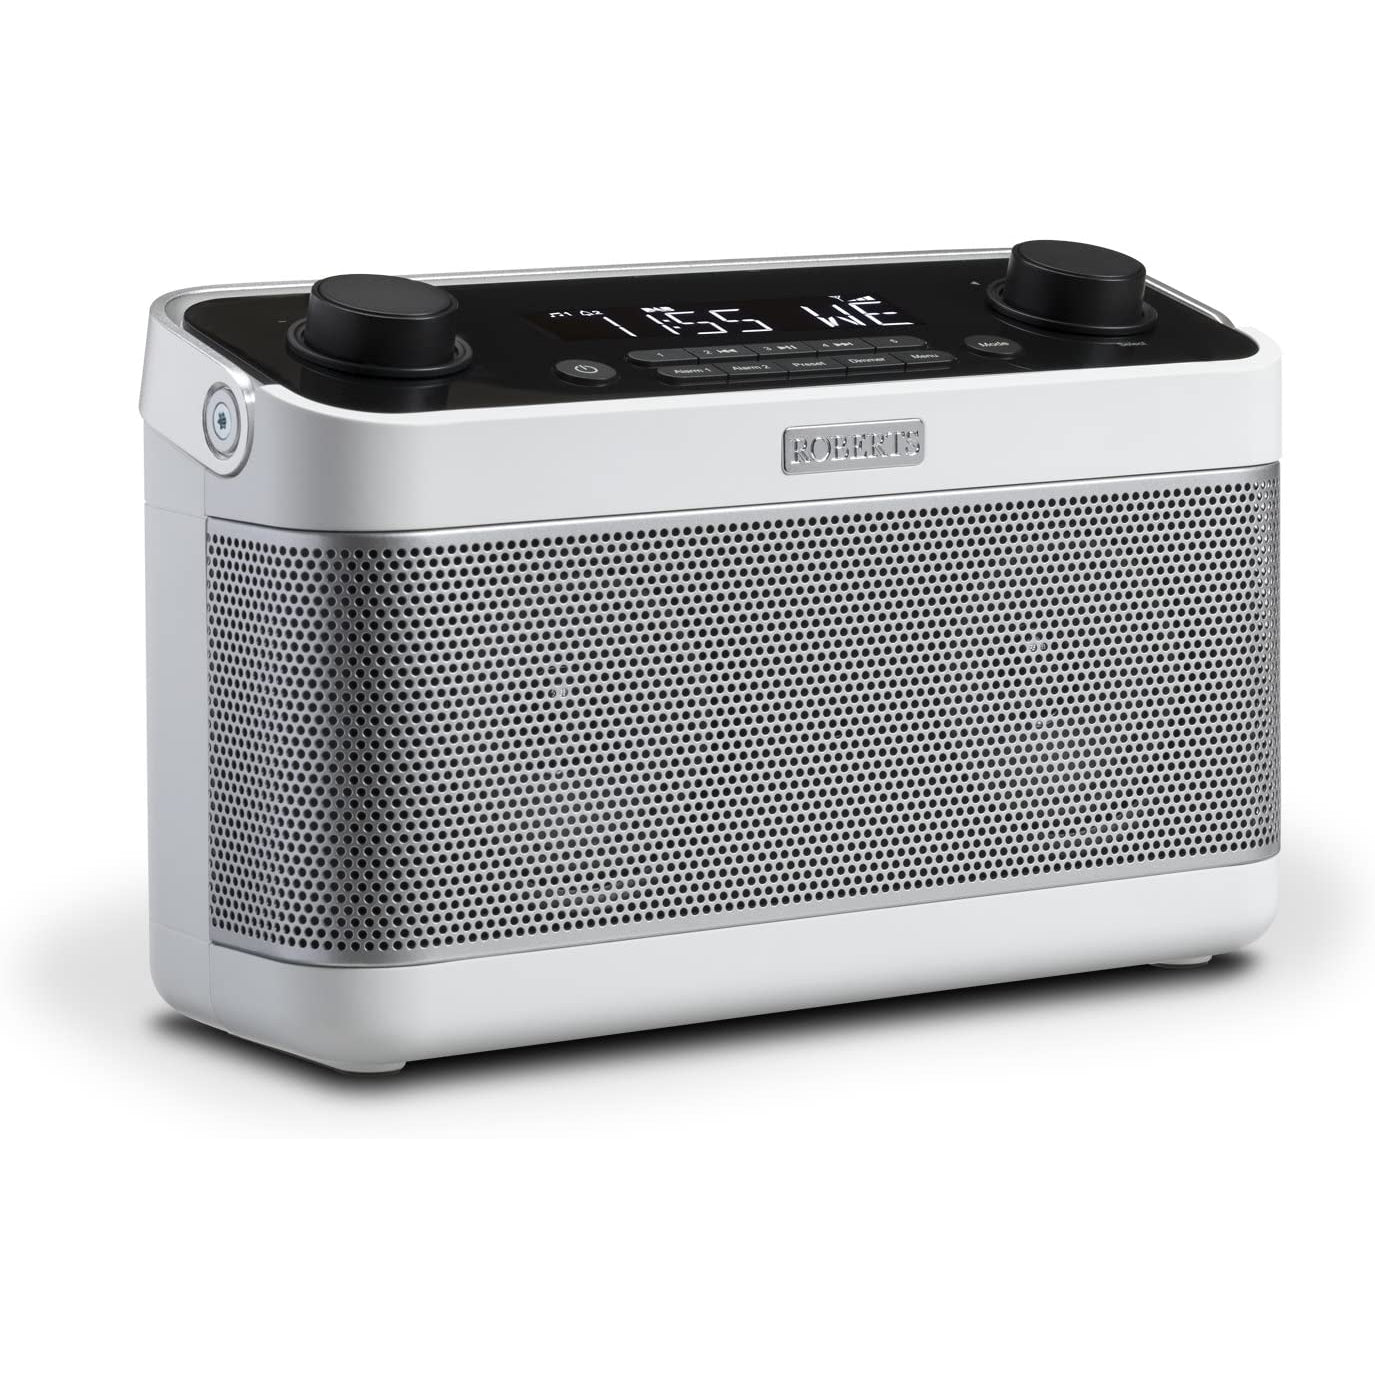 Roberts Blutune 5 DAB+/DAB/FM Radio with Bluetooth and Alarm Function - White